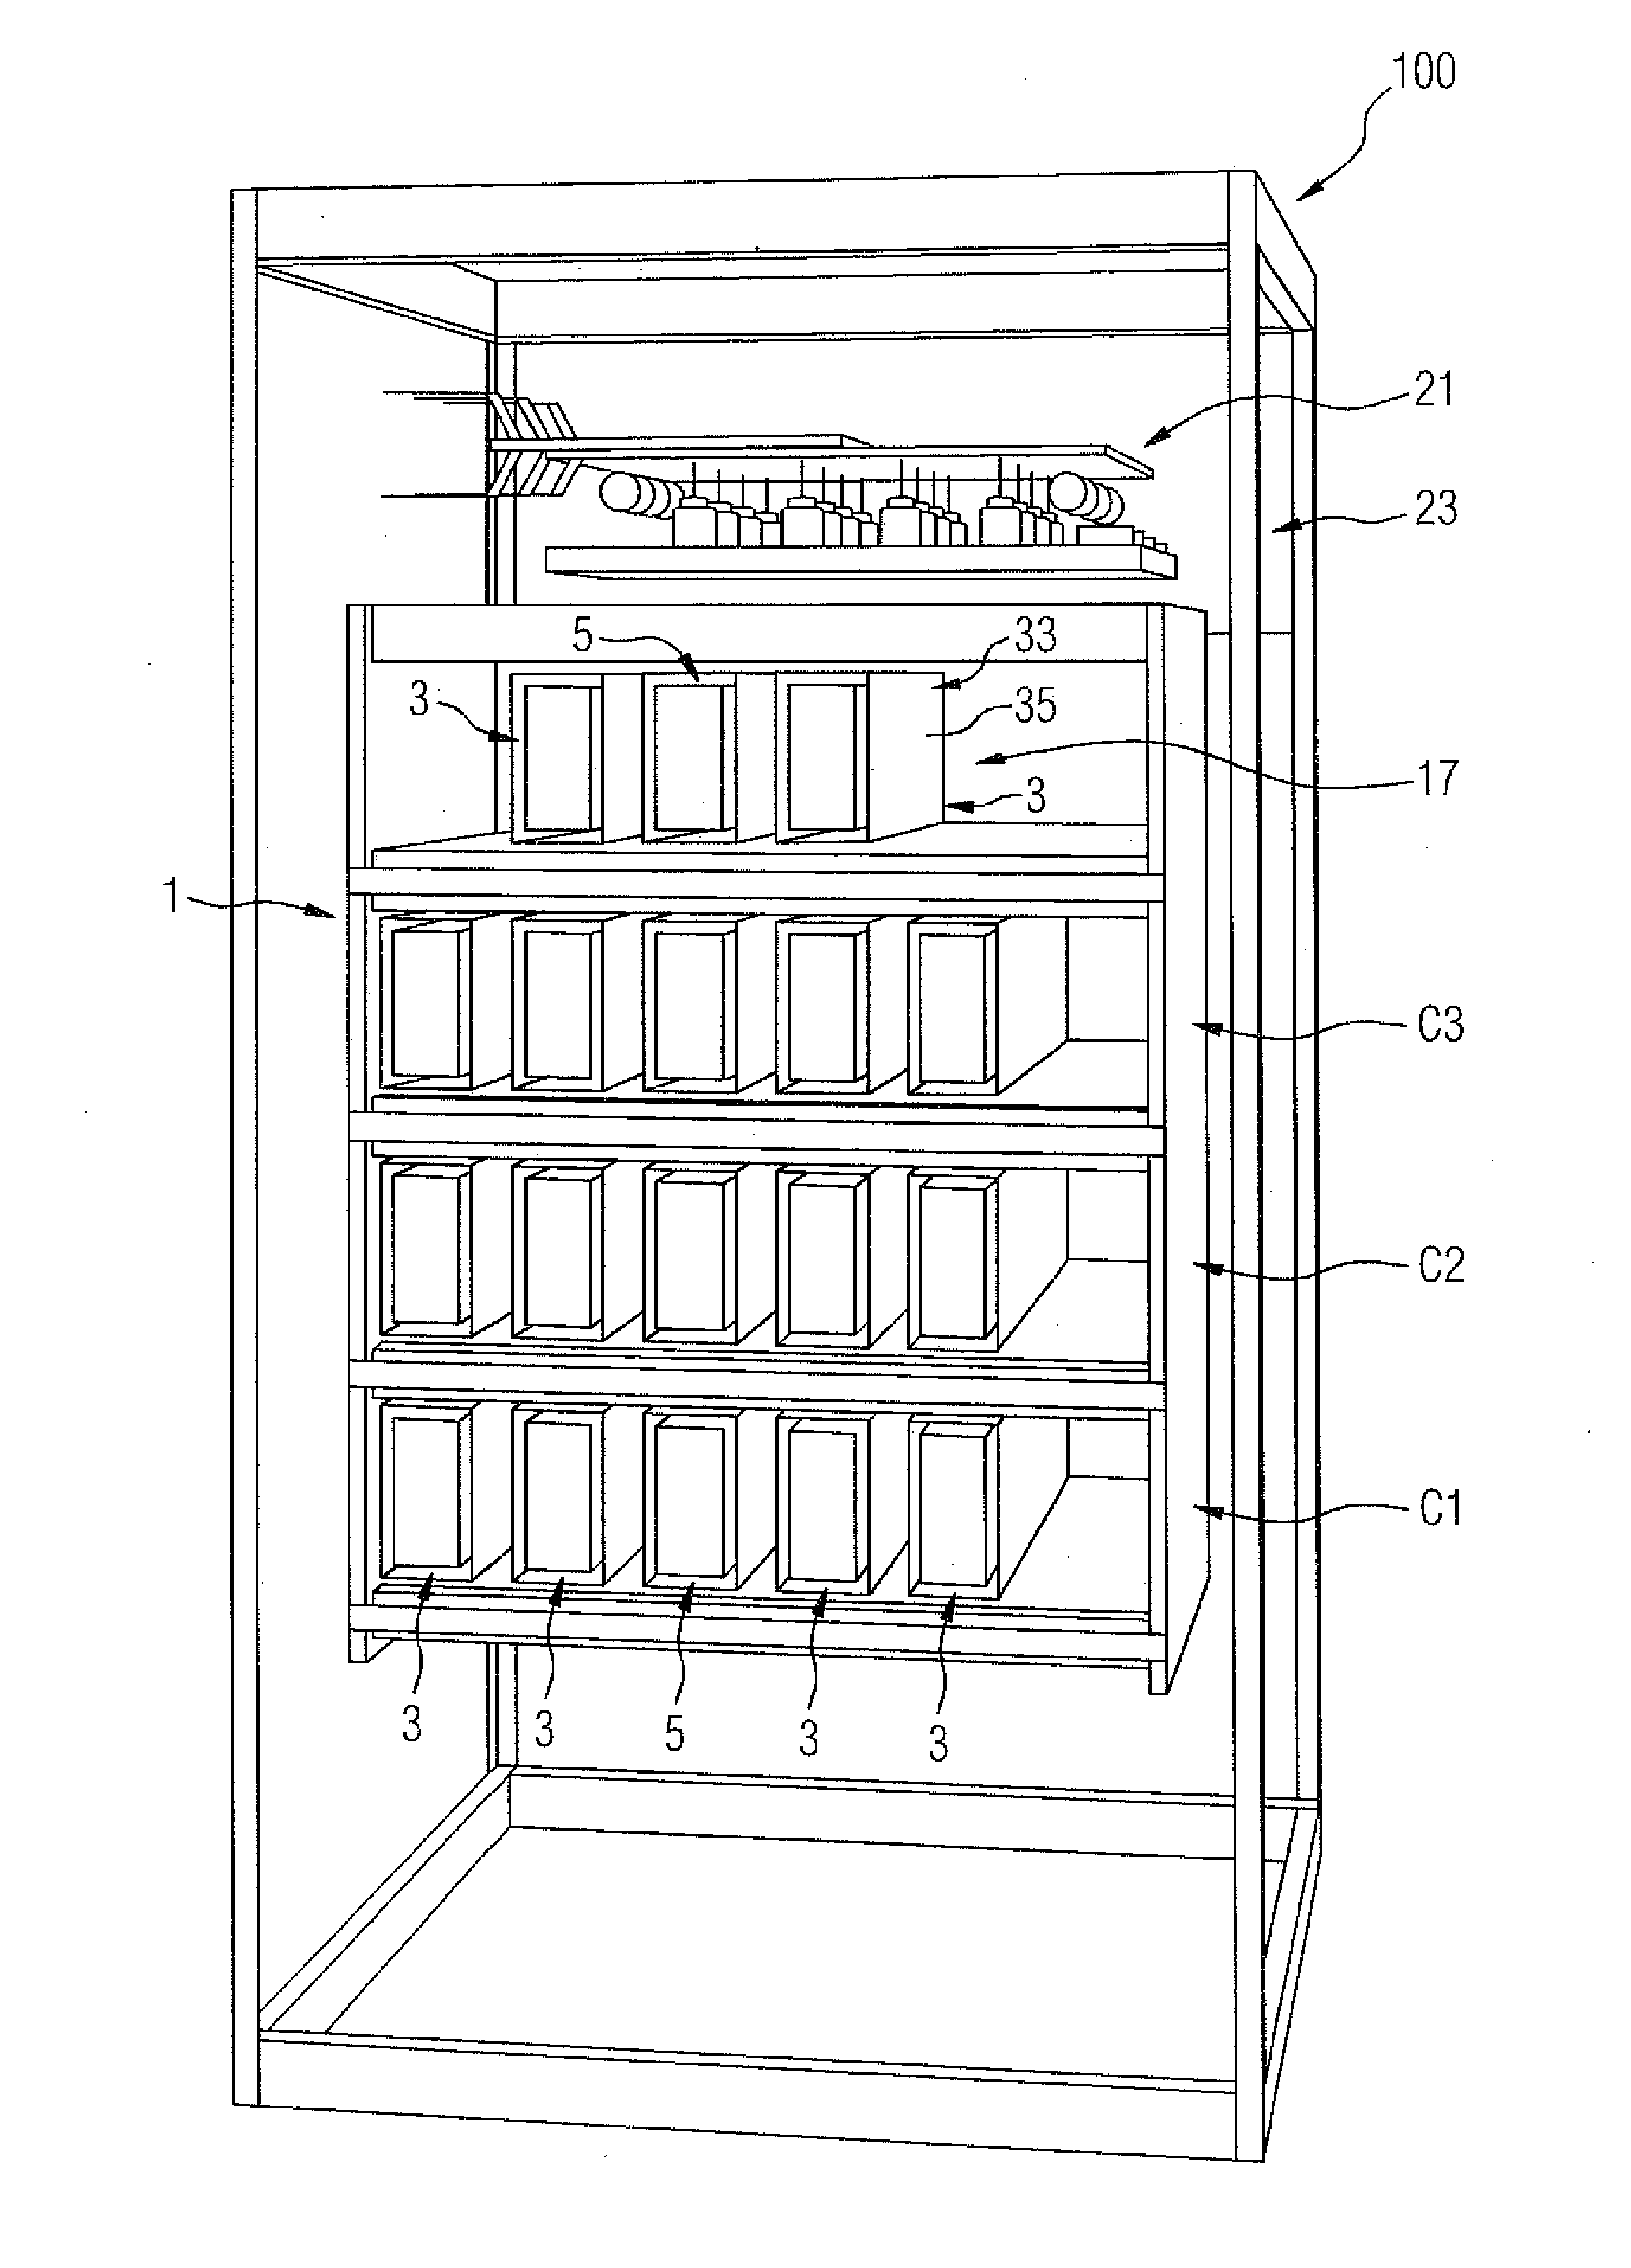 Current converter apparatus having a multi-phase current converter